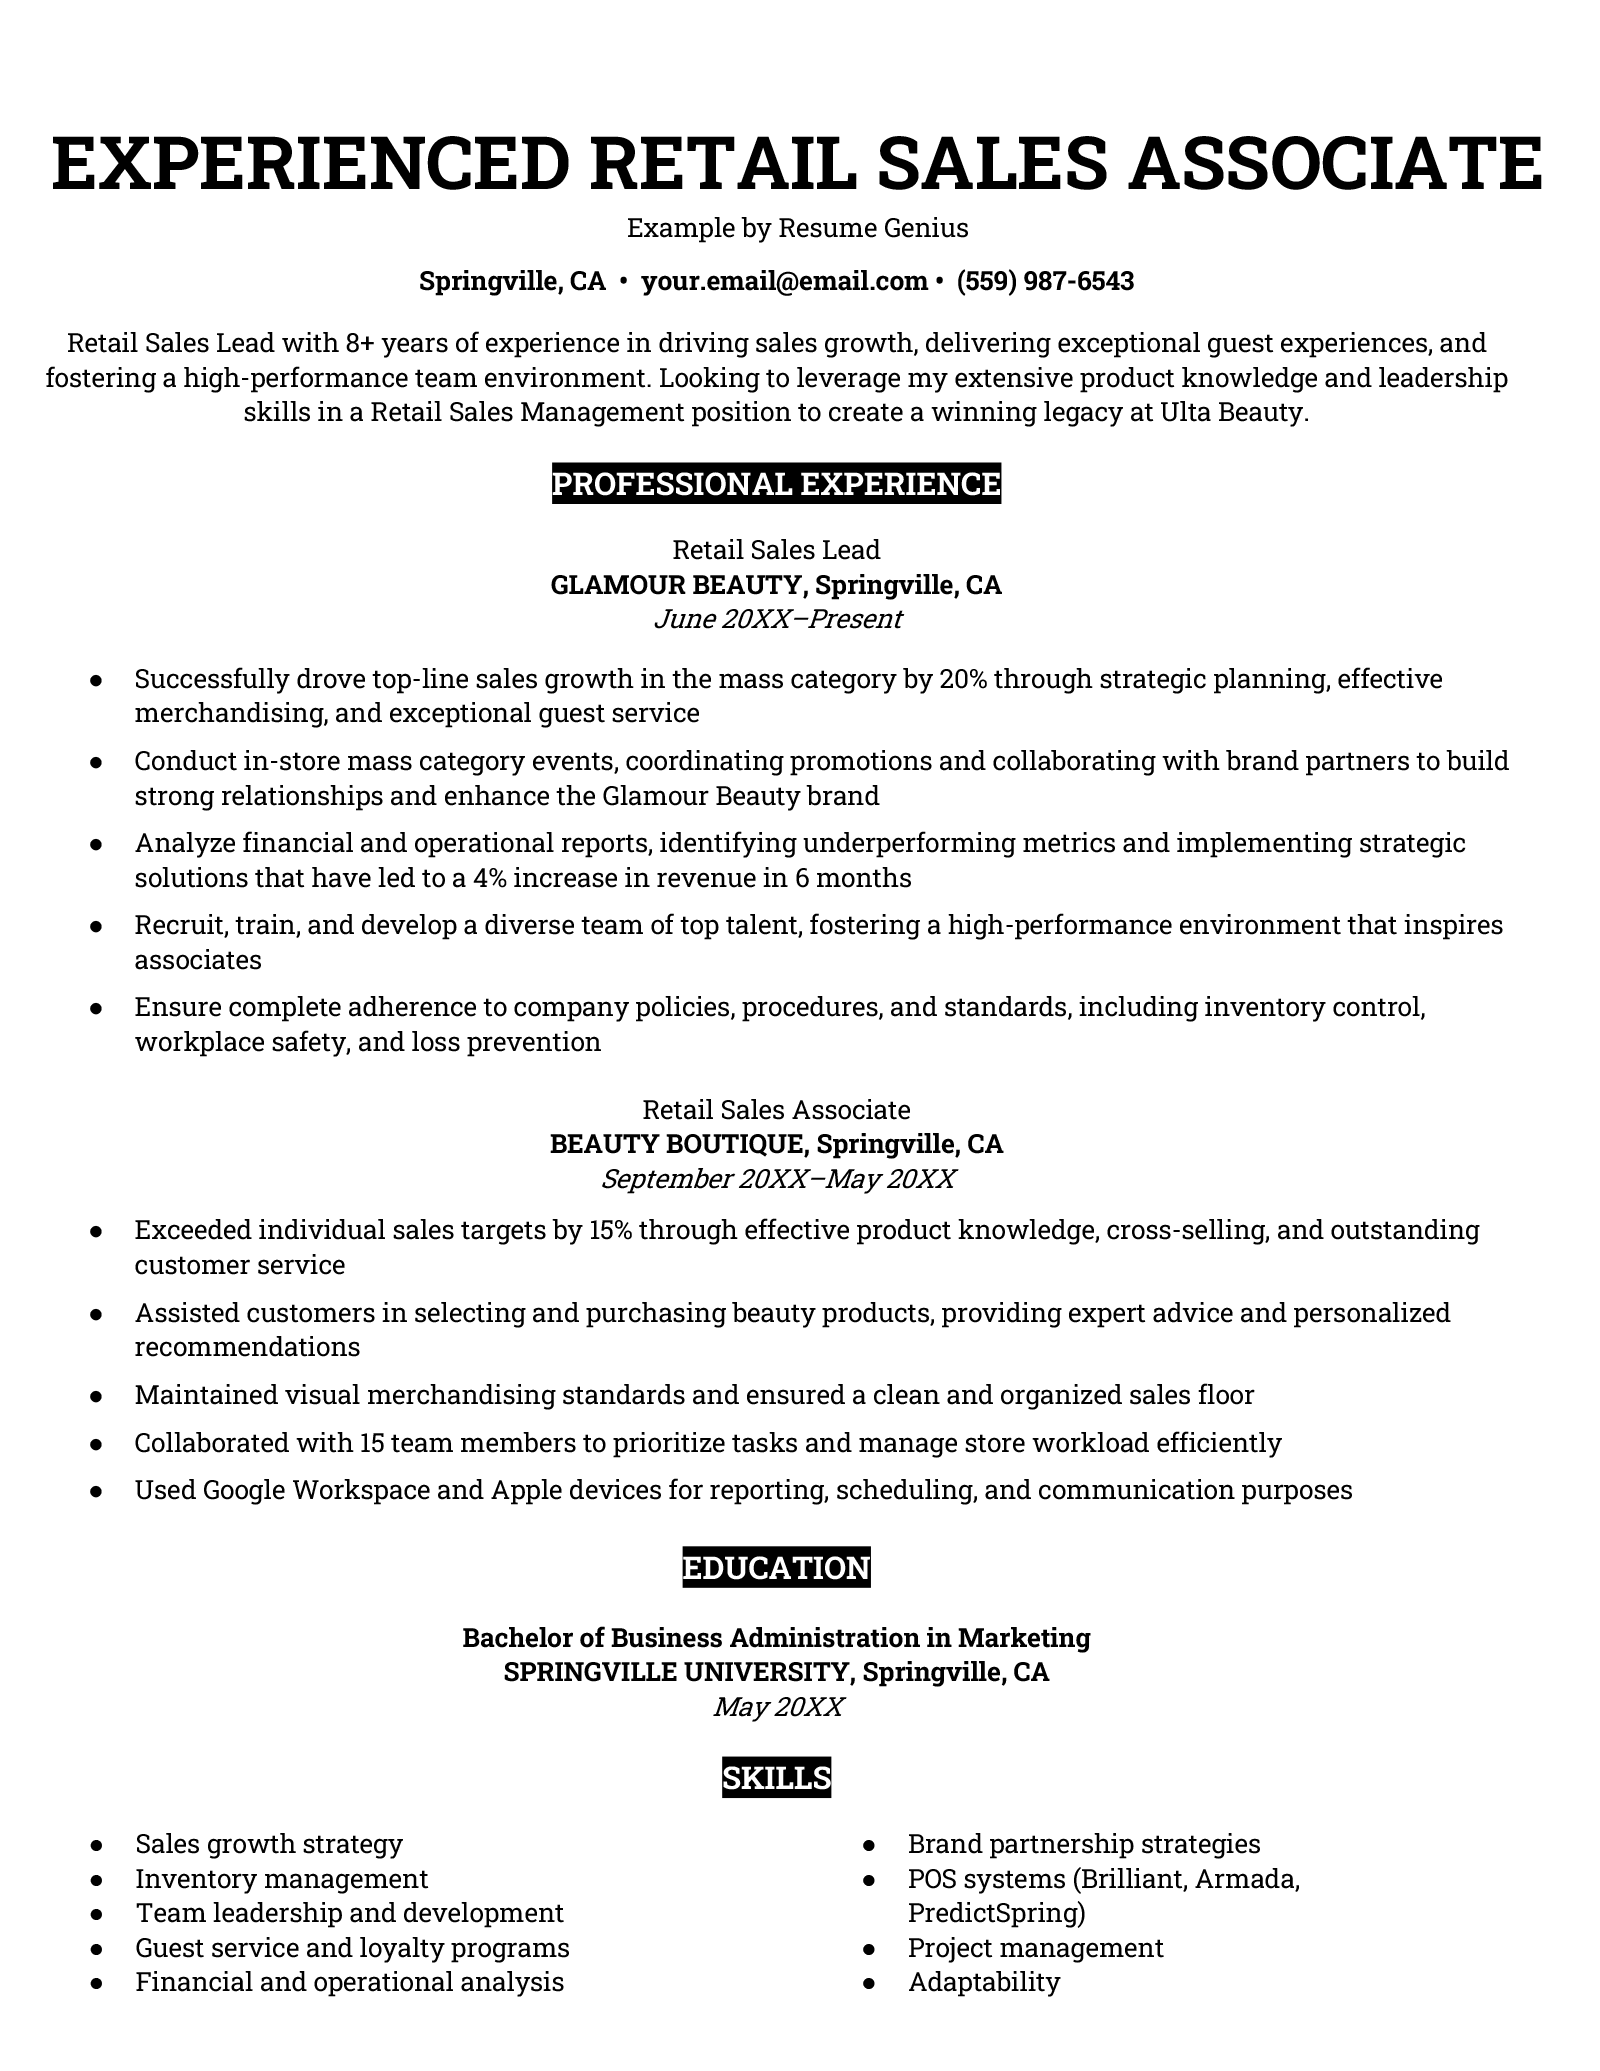 An example of a resume for an experienced retail sales associate with a traditional and simple resume layout and black section headings.